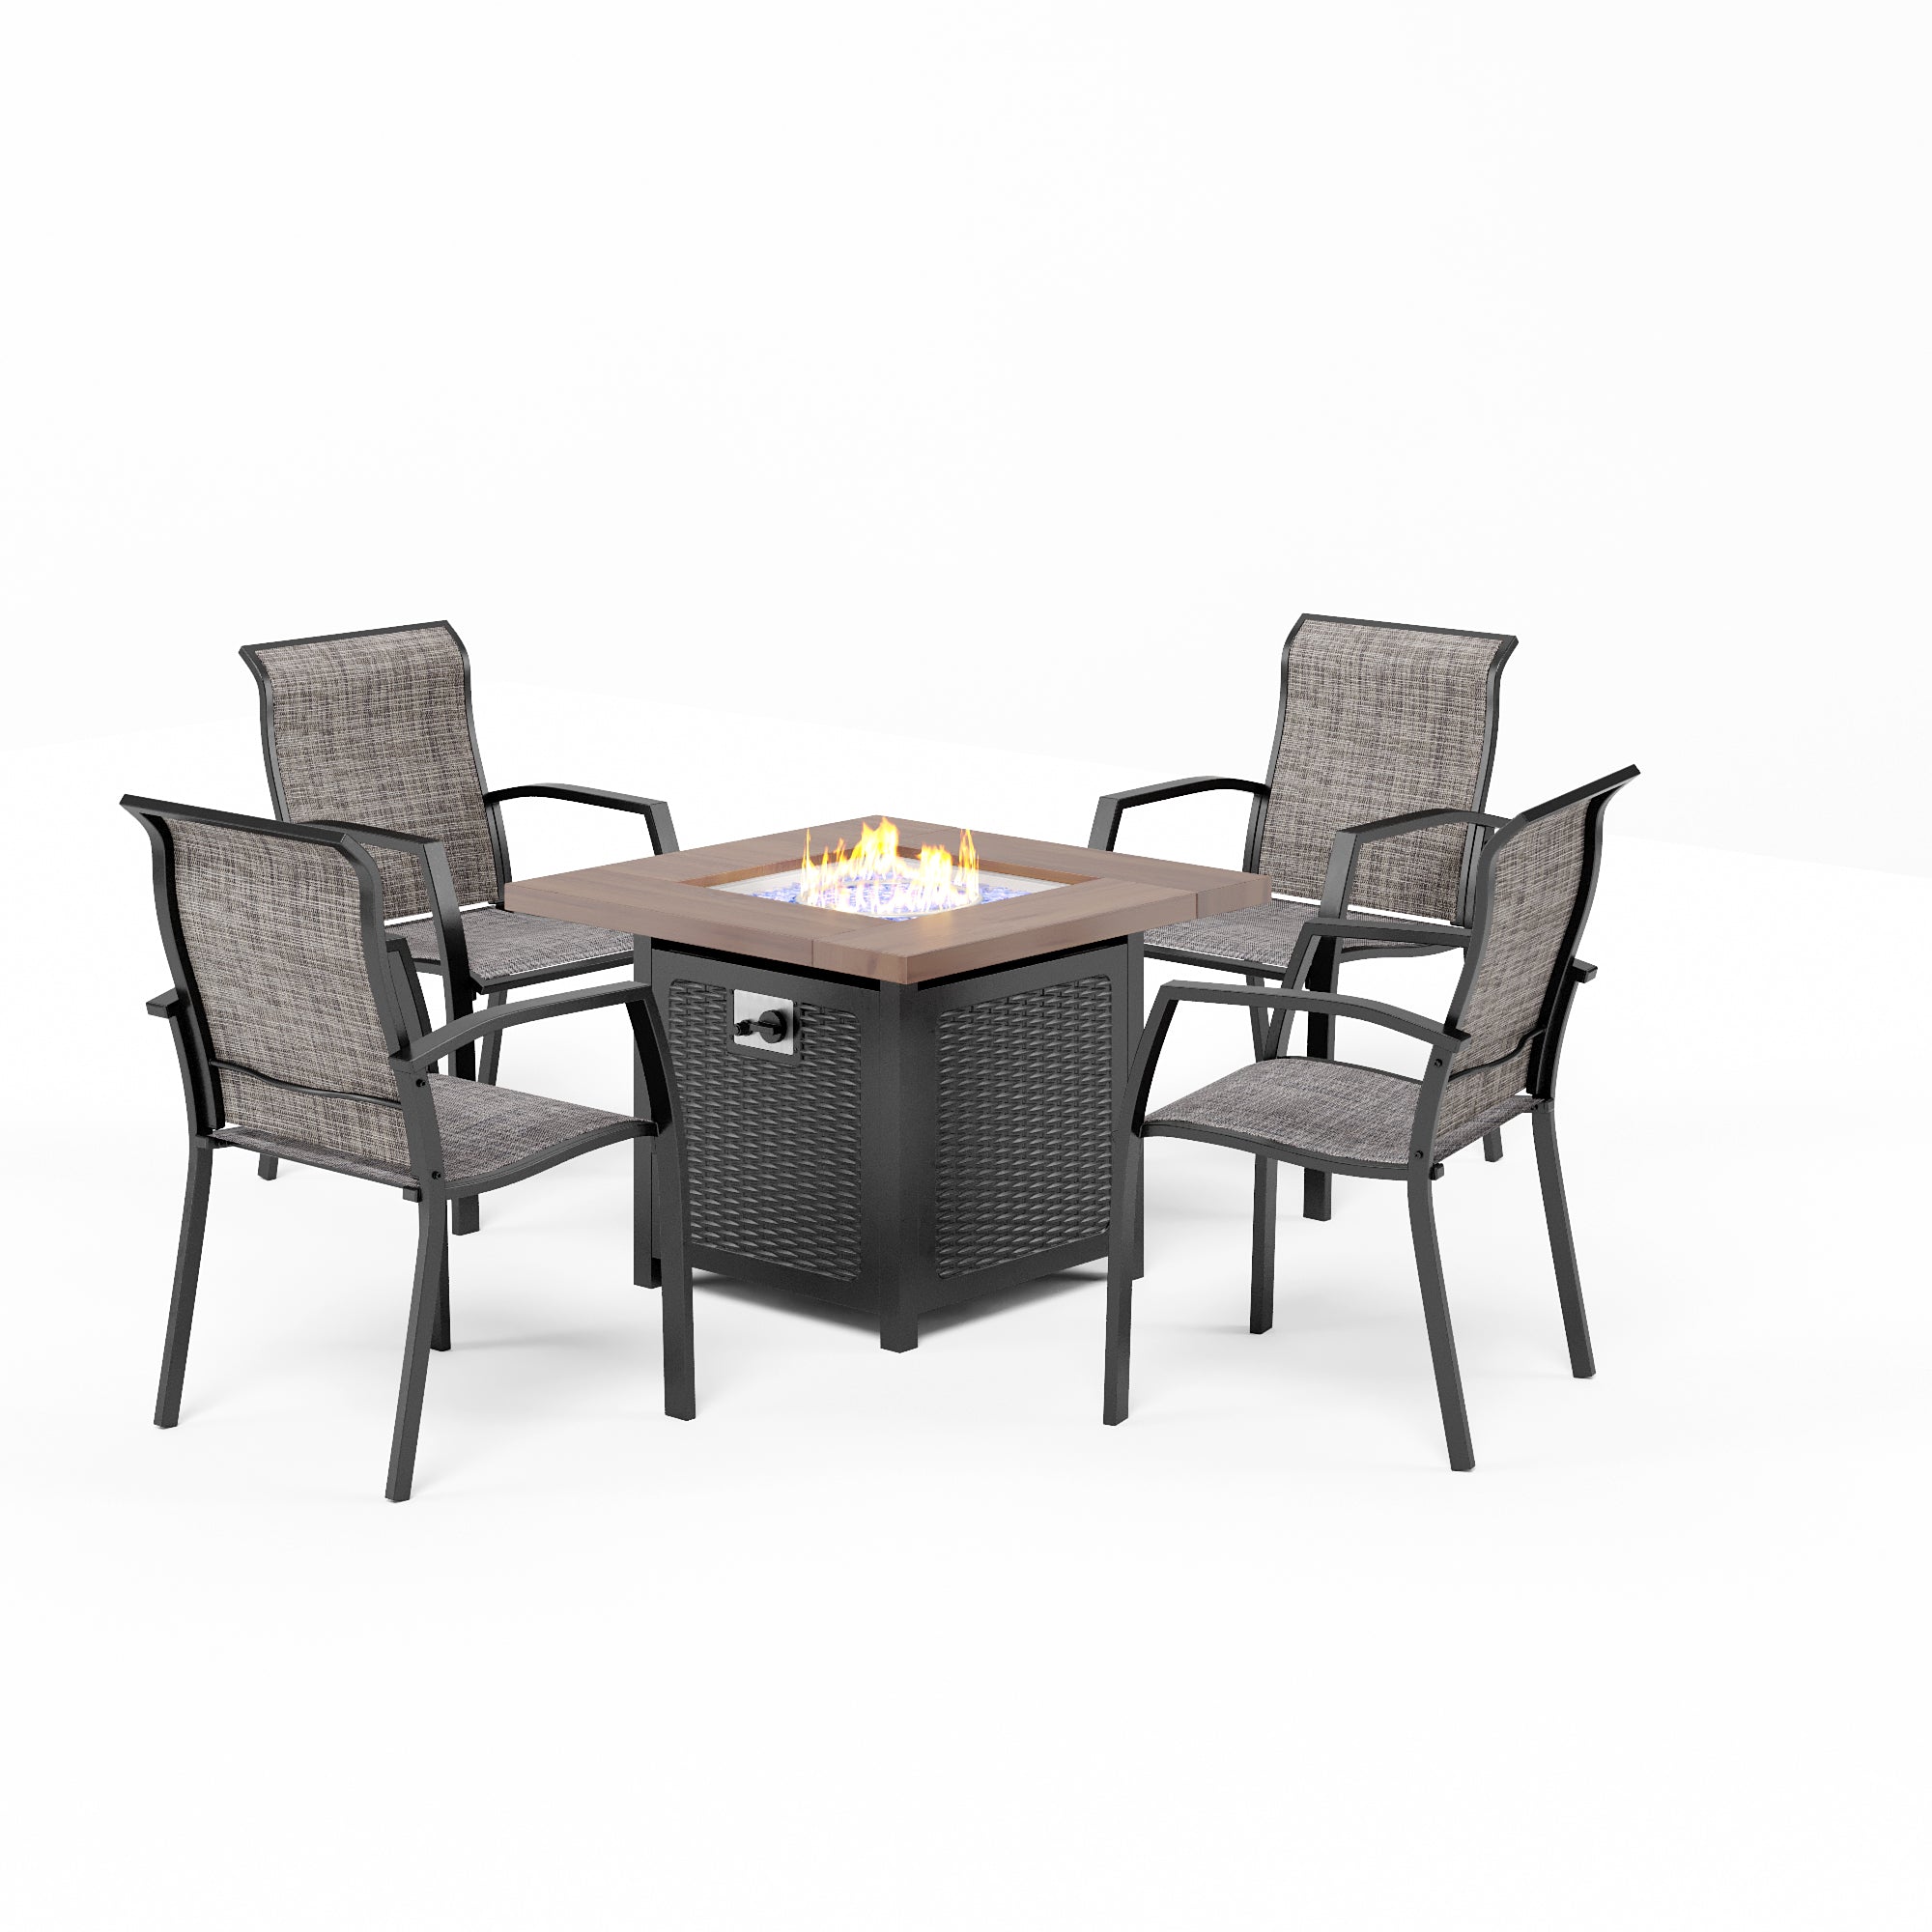 PHI VILLA 5-Piece 34" Wood-look Gas Fire Pit Table & Simple Aluminum Textilene Fixed Chairs Patio Dining Set